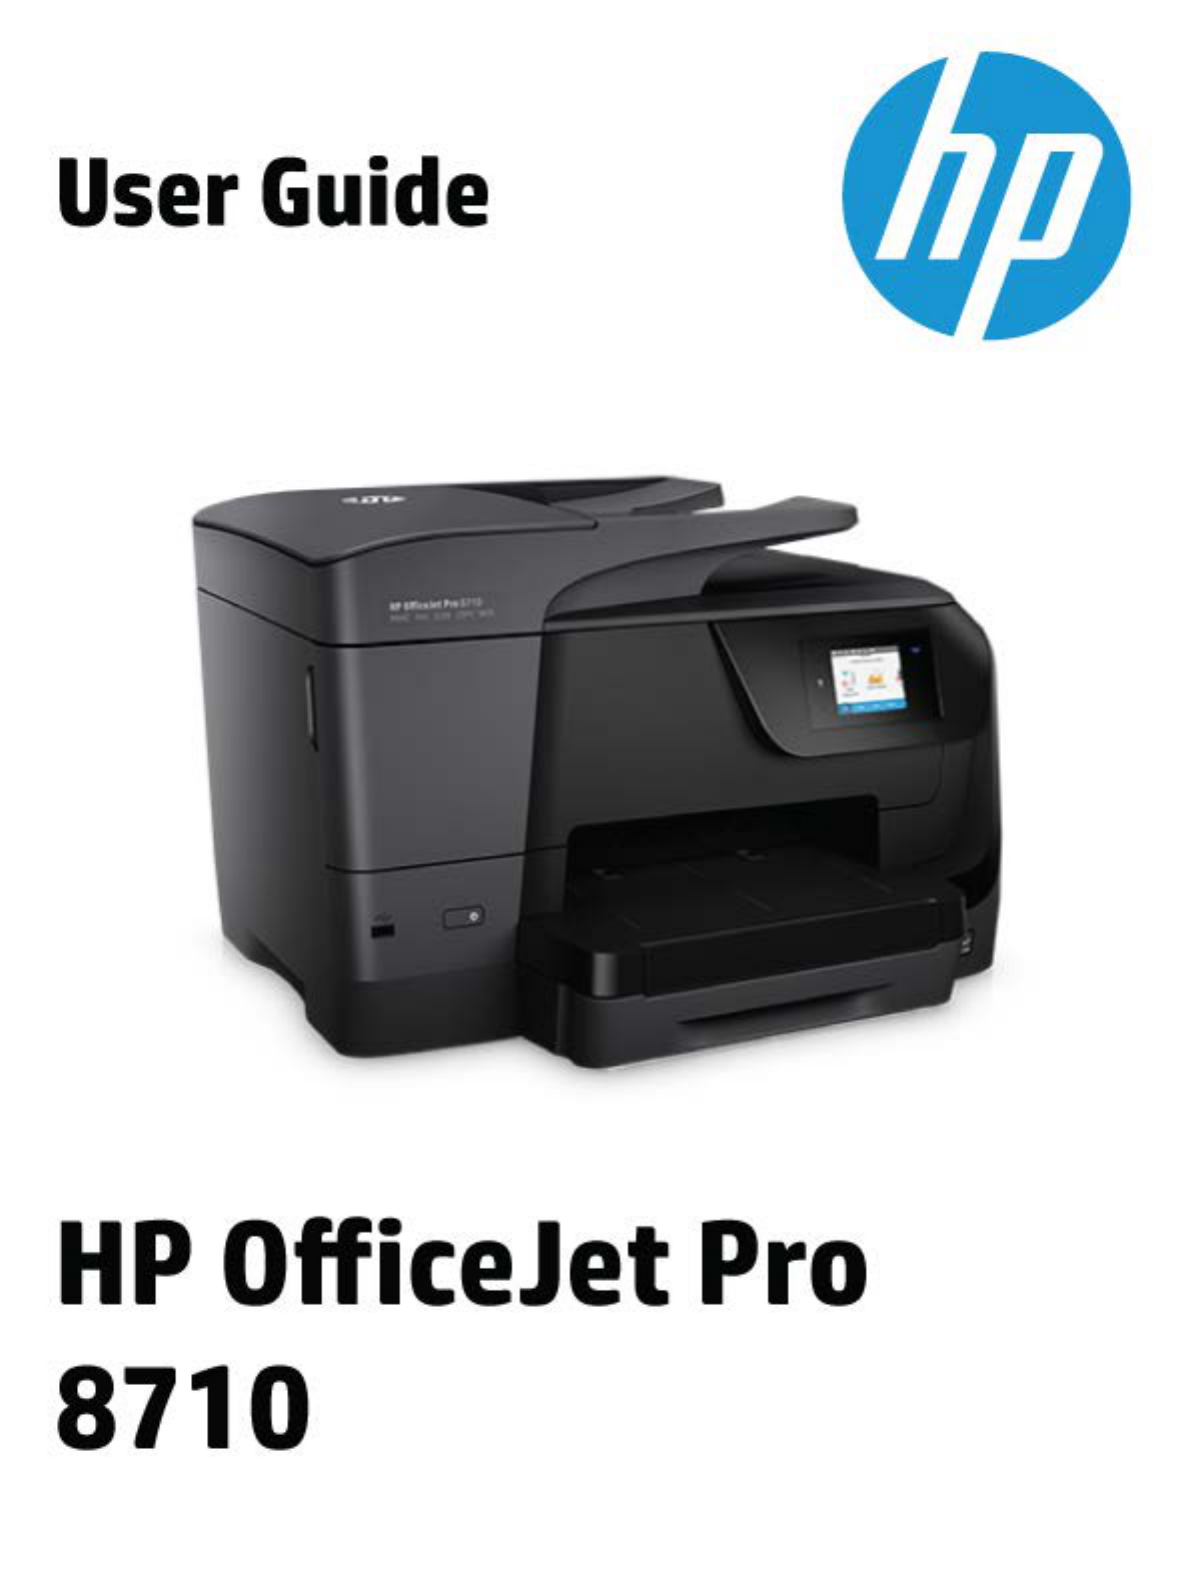 Manual HP OfficeJet Pro All-in-One (page 1 of 181) (English)